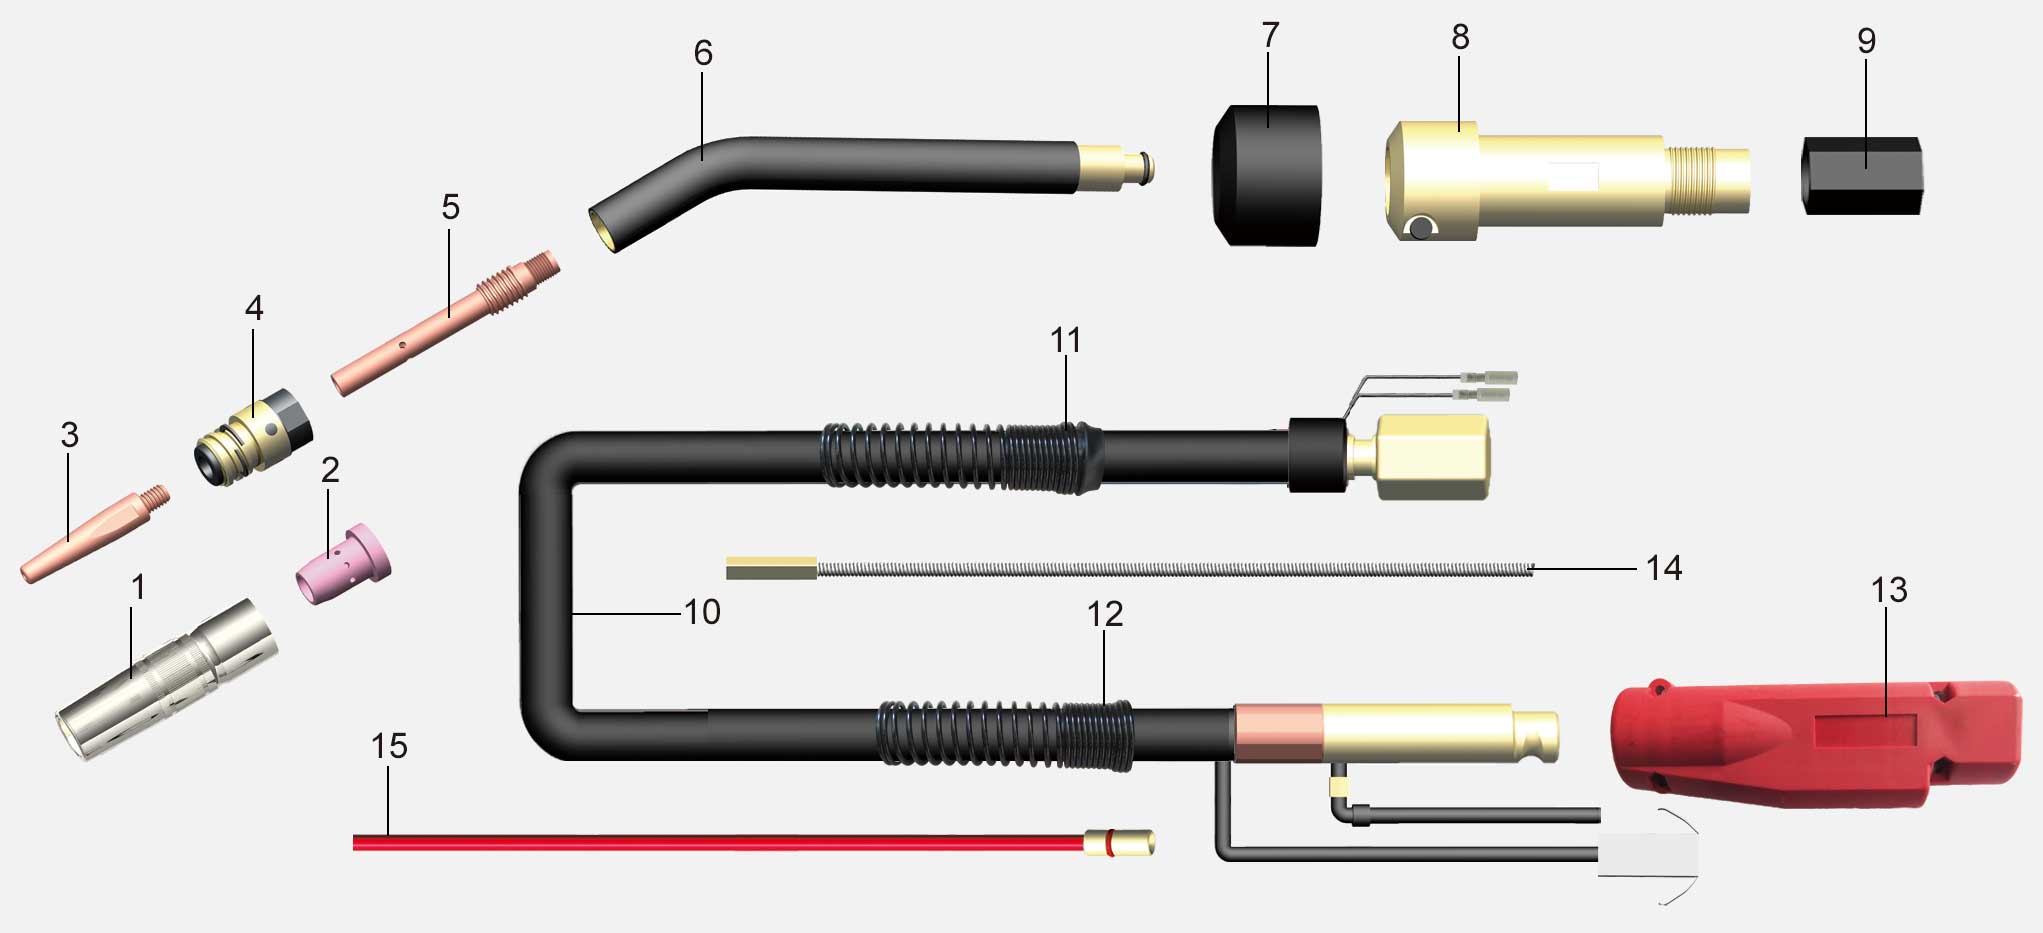 Product structure of the BW YT-CAT50 Air Cooled Robot Welding Torch